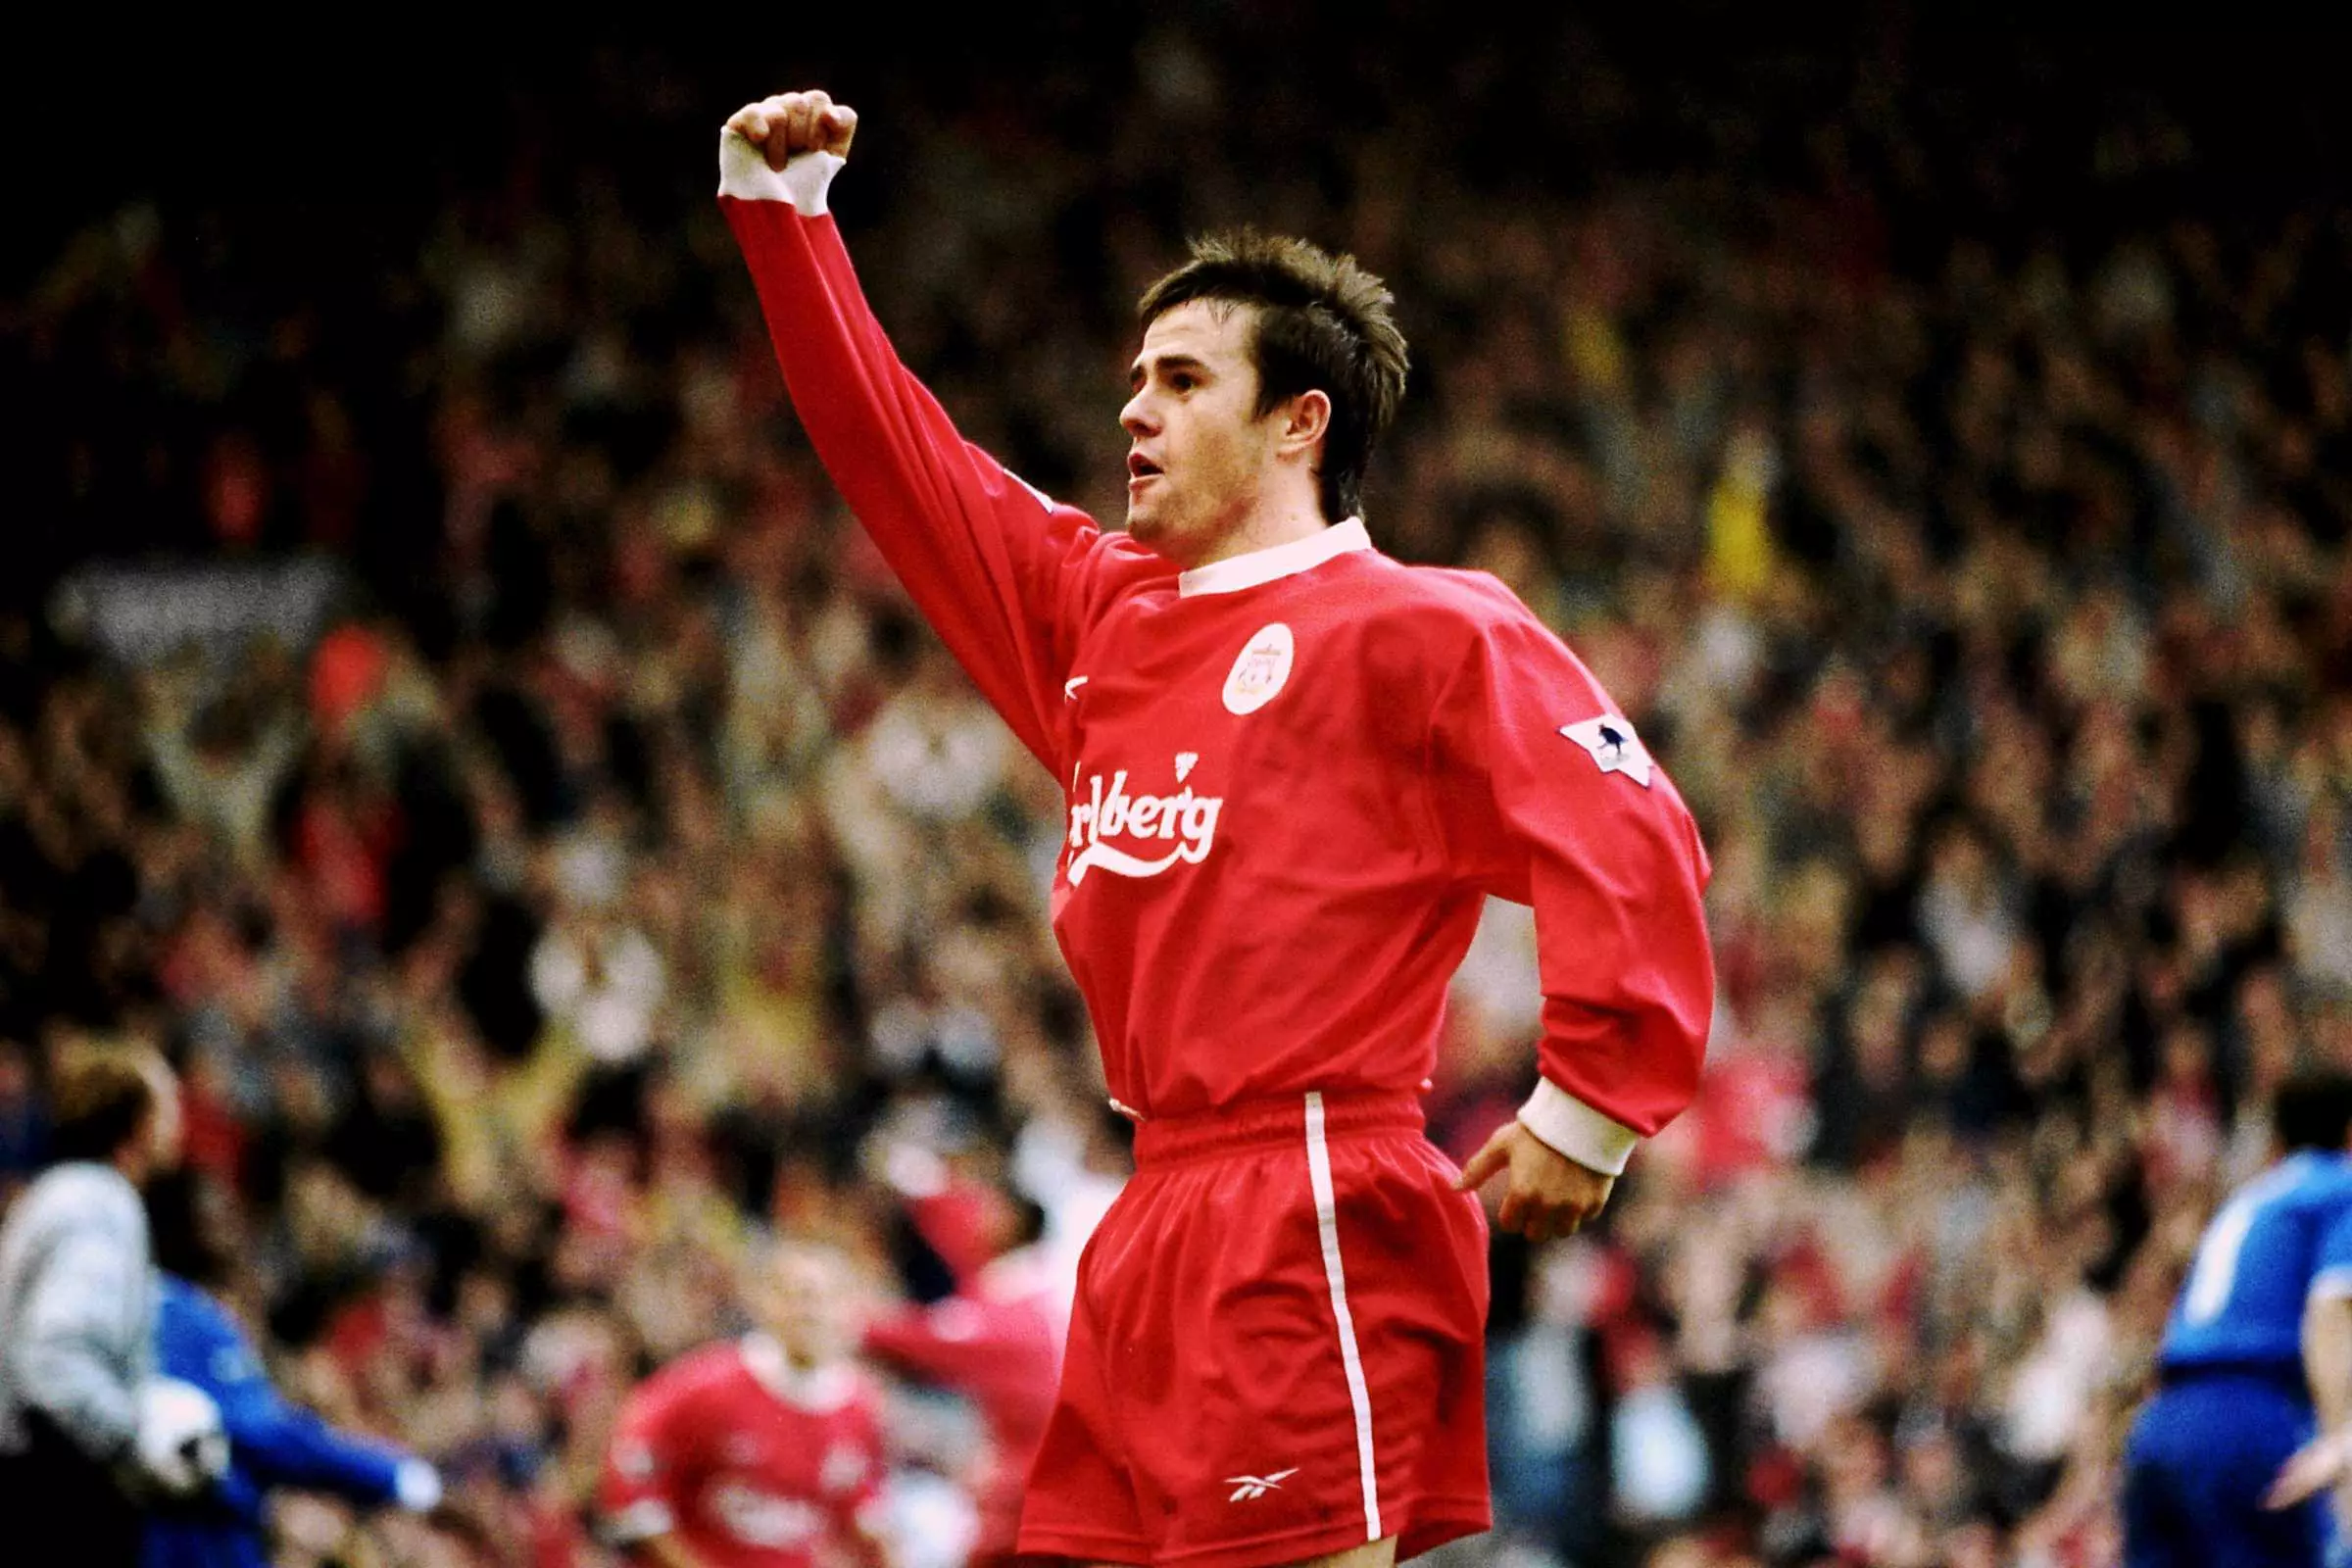 David Thompson made 24 Liverpool appearances before Steven Gerrard's debut, and the midfielder's talent was obvious